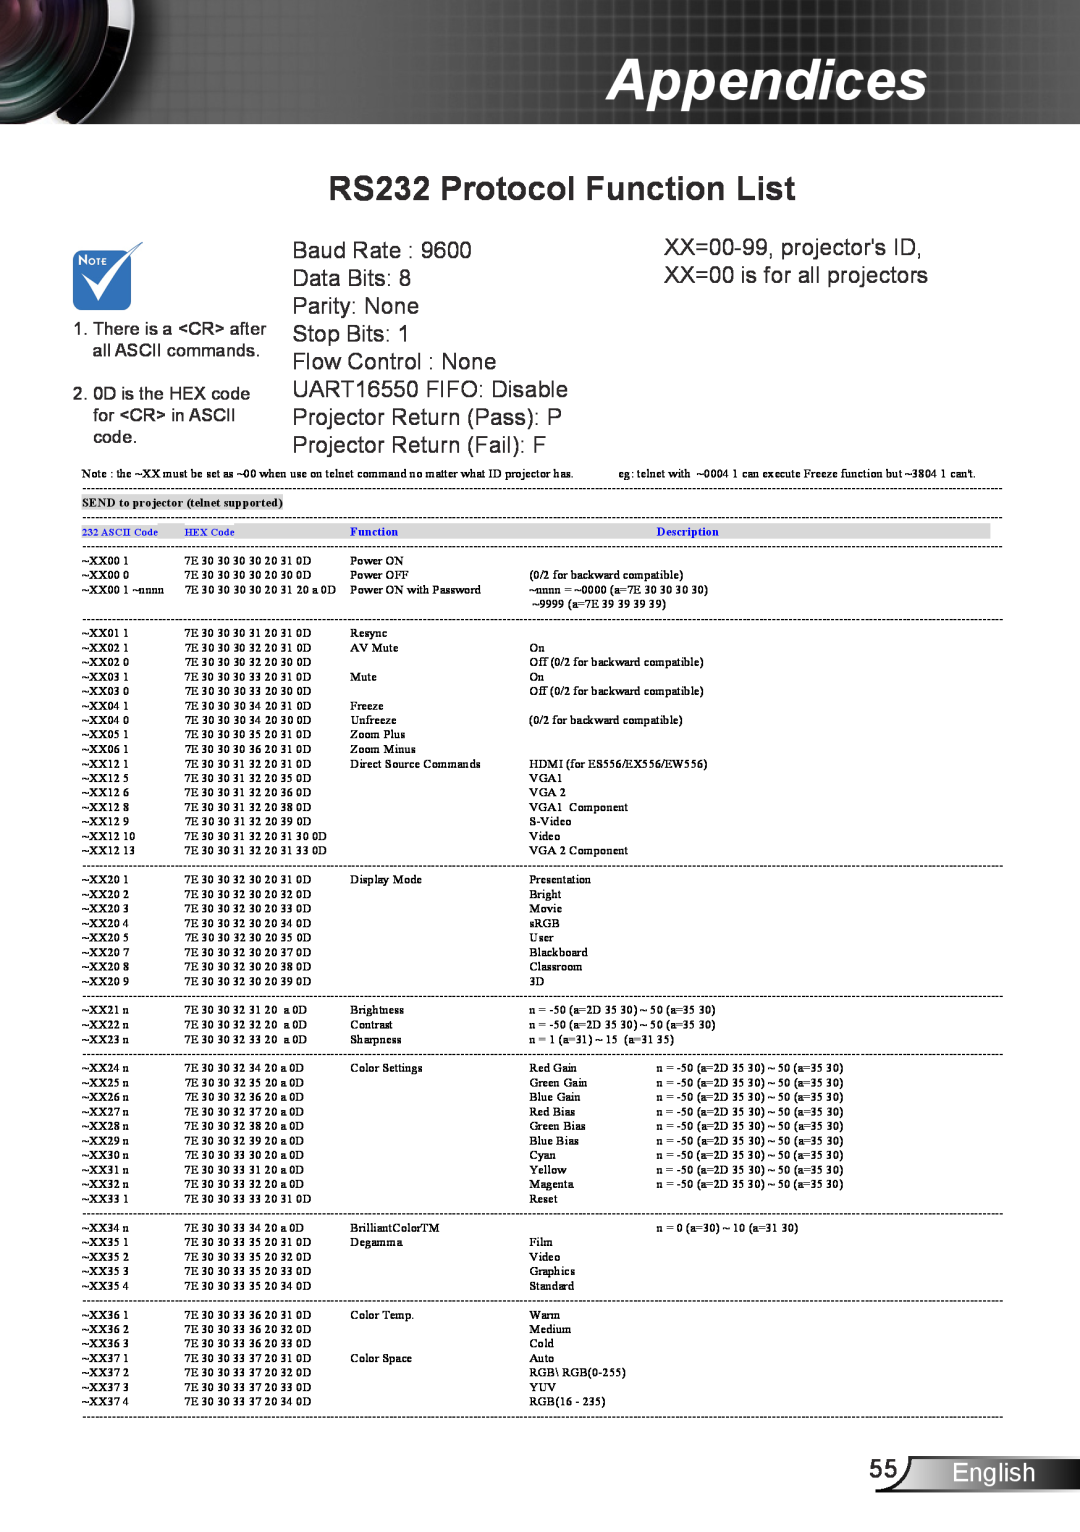 Optoma Technology DS339, TW5563D RS232 Protocol Function List, English, Appendices, SEND to projector telnet supported 